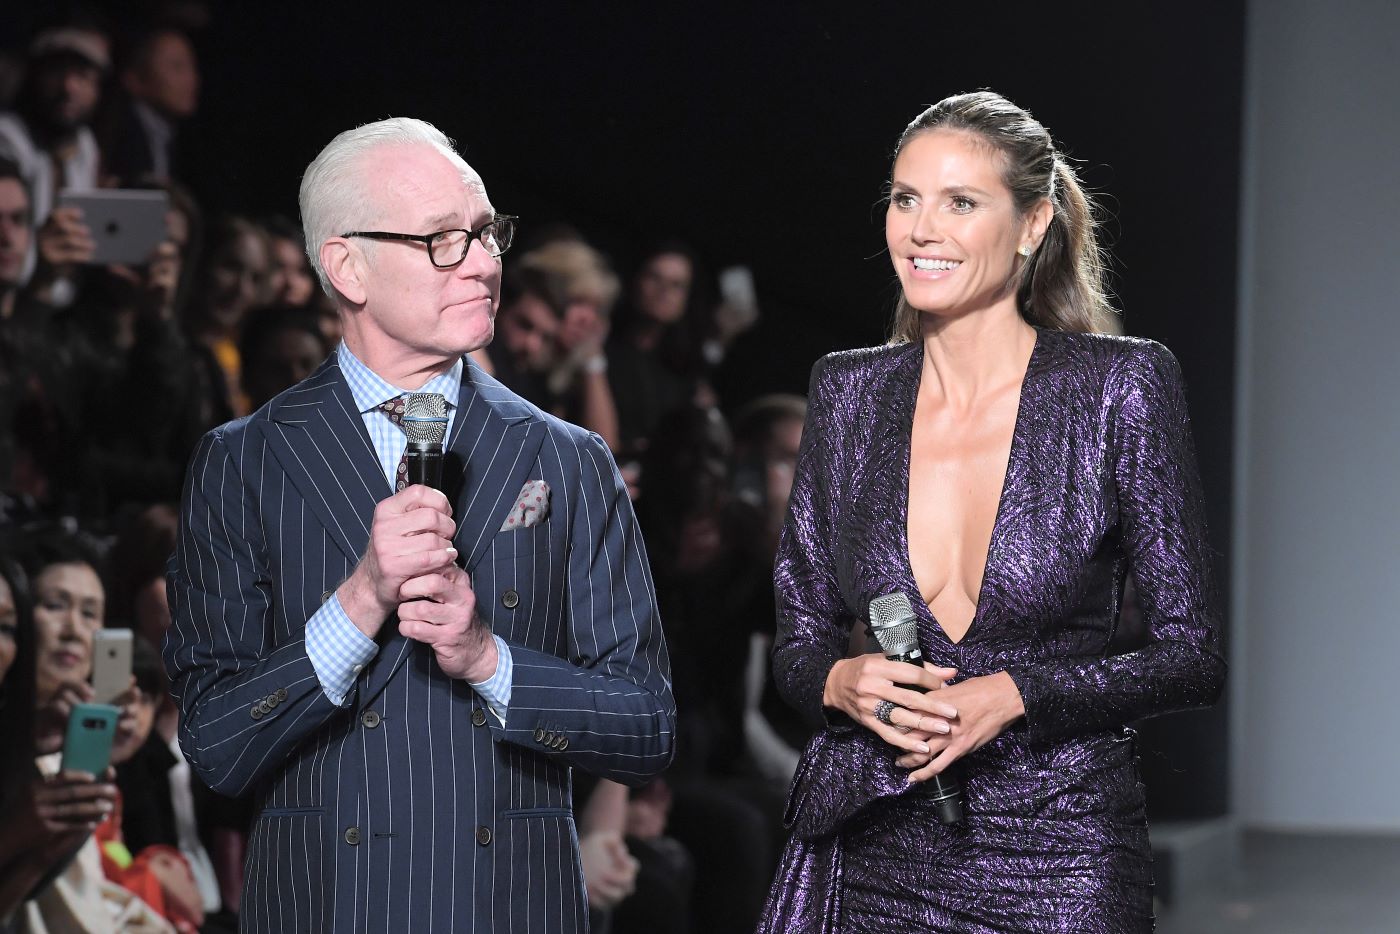 Former 'Project Runway' star Tim Gunn in a suit and Heidi Klum in a sparkly purple dress